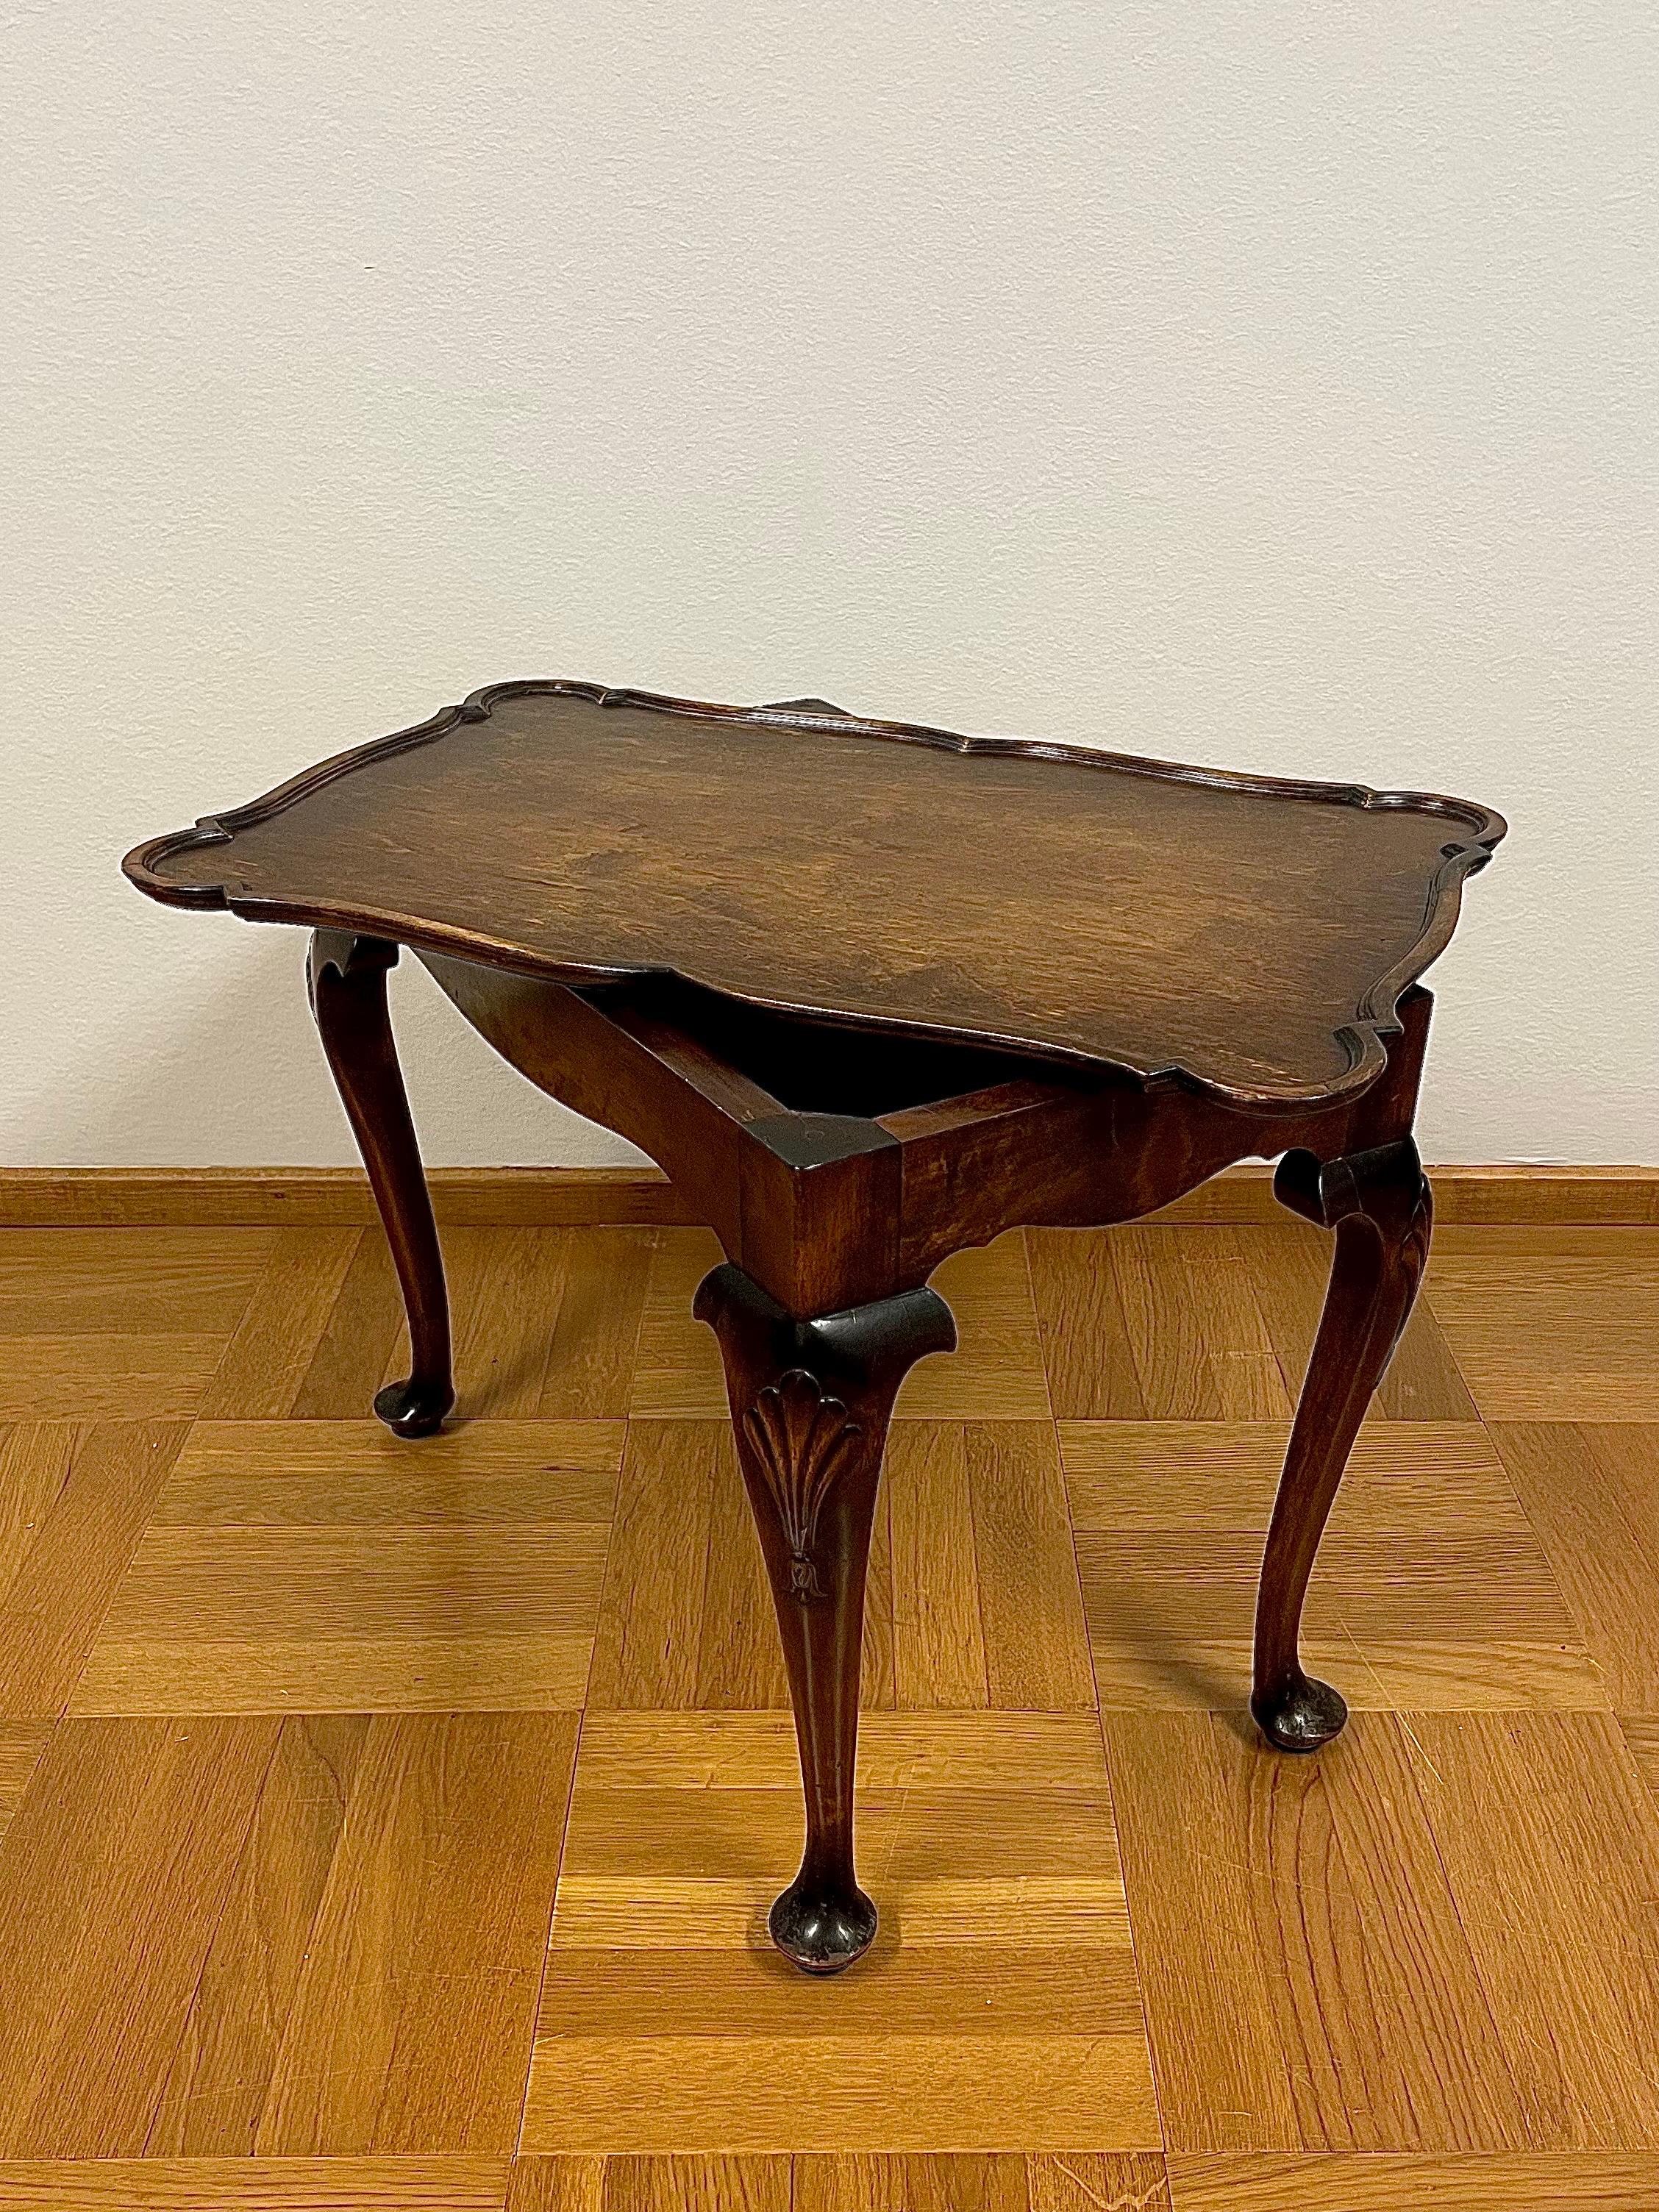 Swedish Tray Table in Stained Birch Manufactured 13/3 1929 by Nordiska Kompaniet For Sale 2